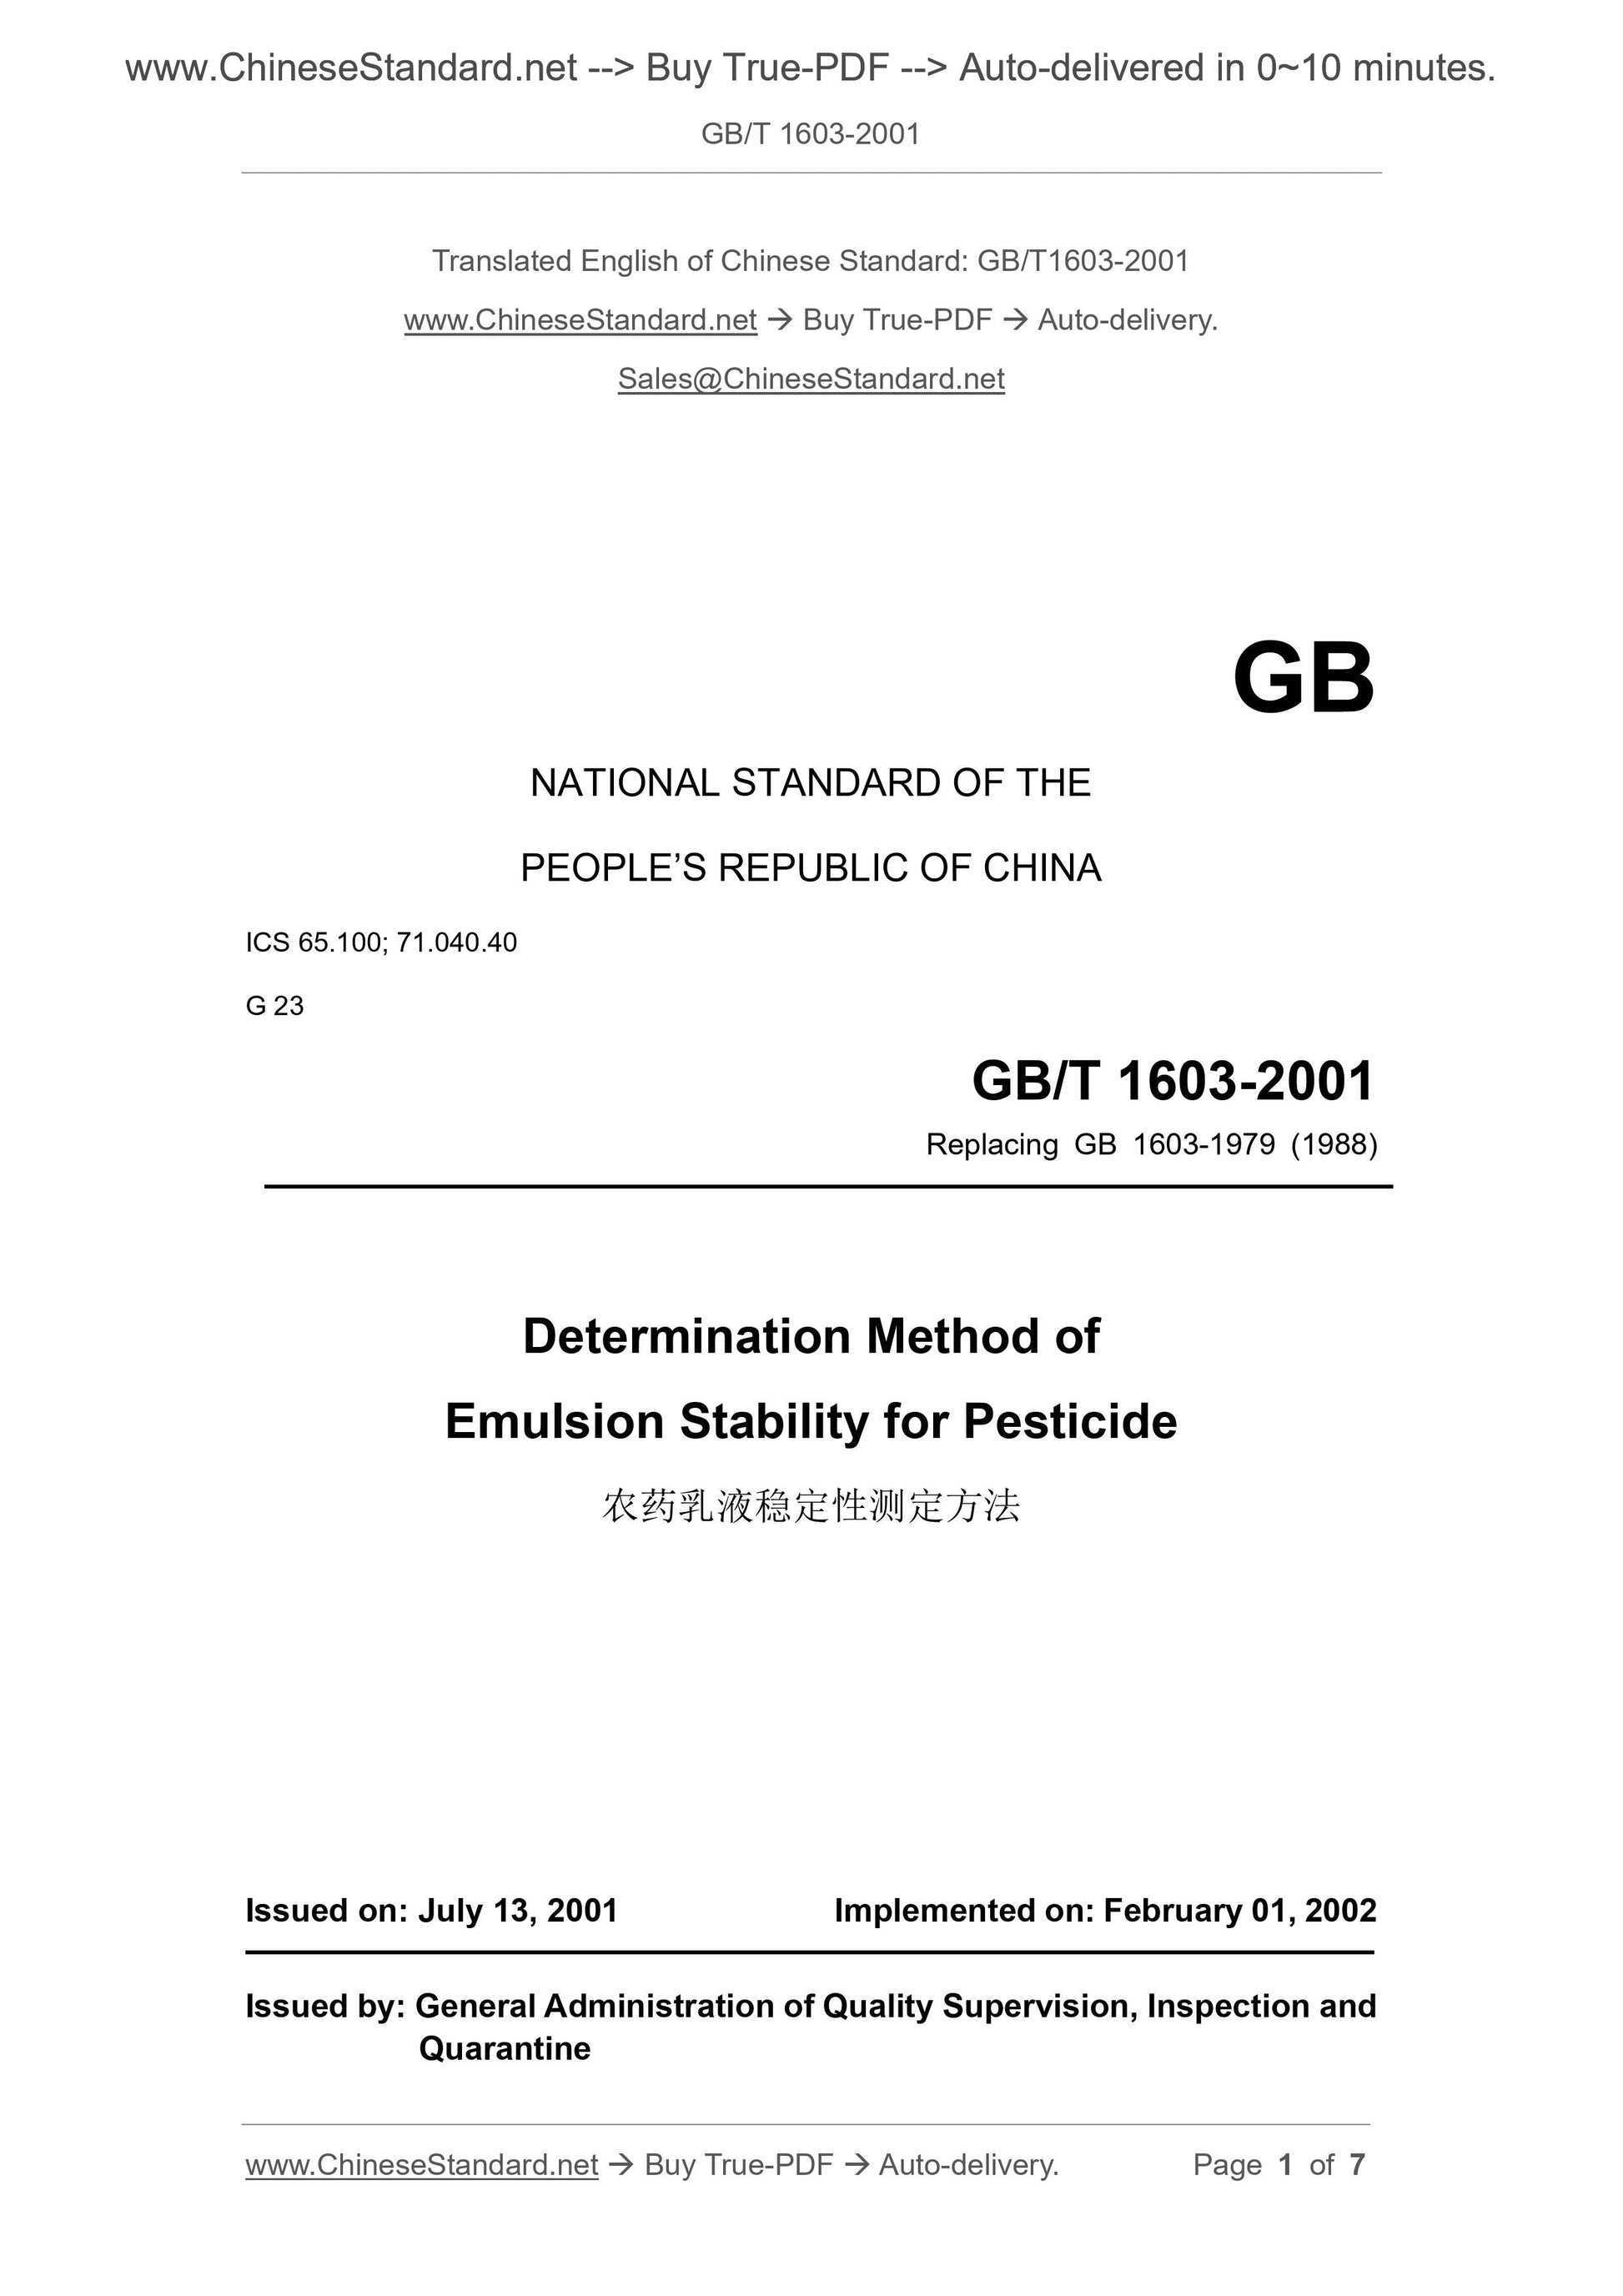 GB/T 1603-2001 Page 1